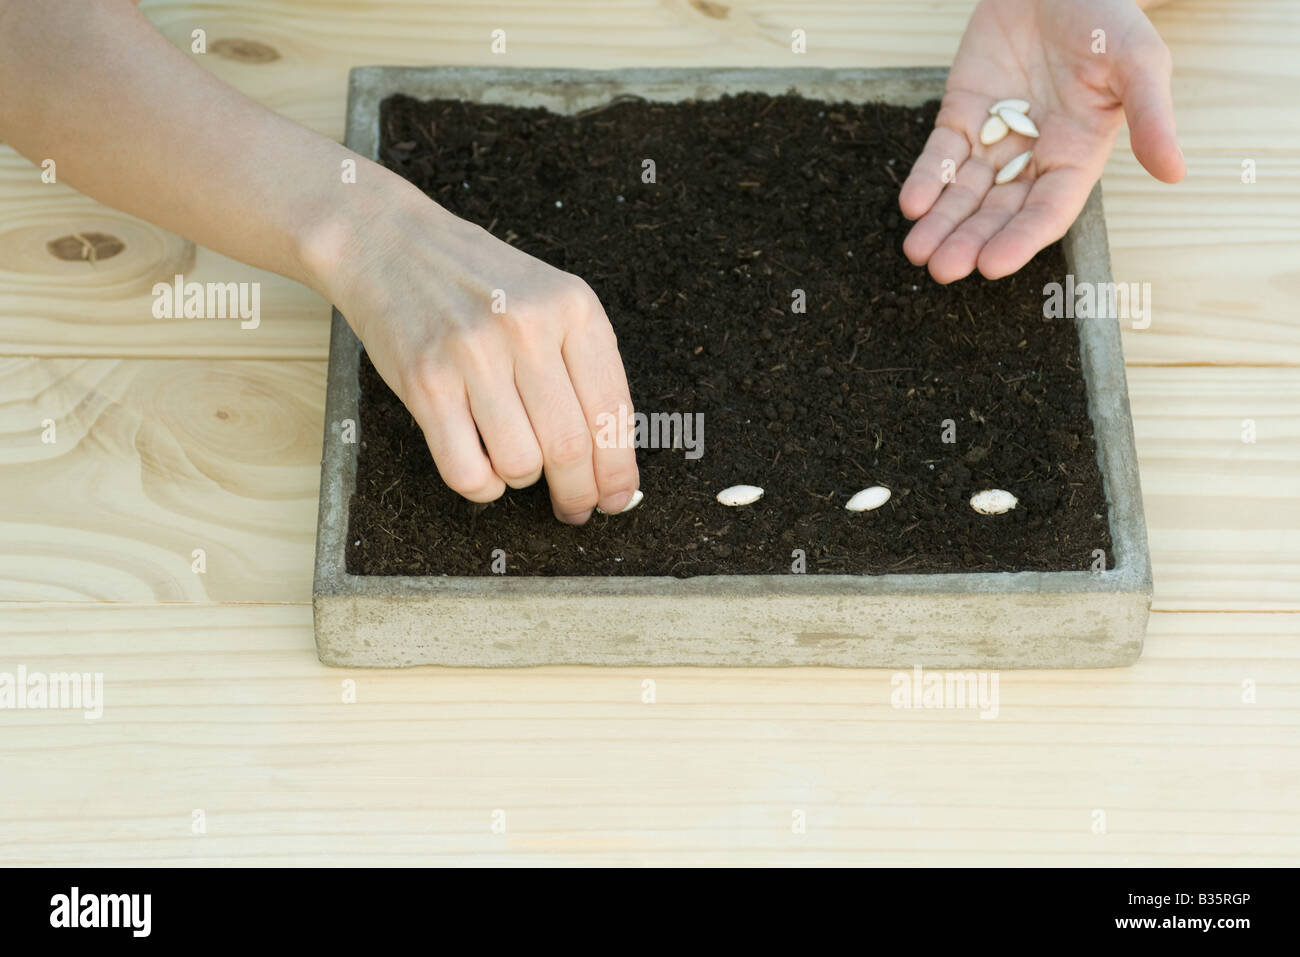 Planting seeds in tray Stock Photo